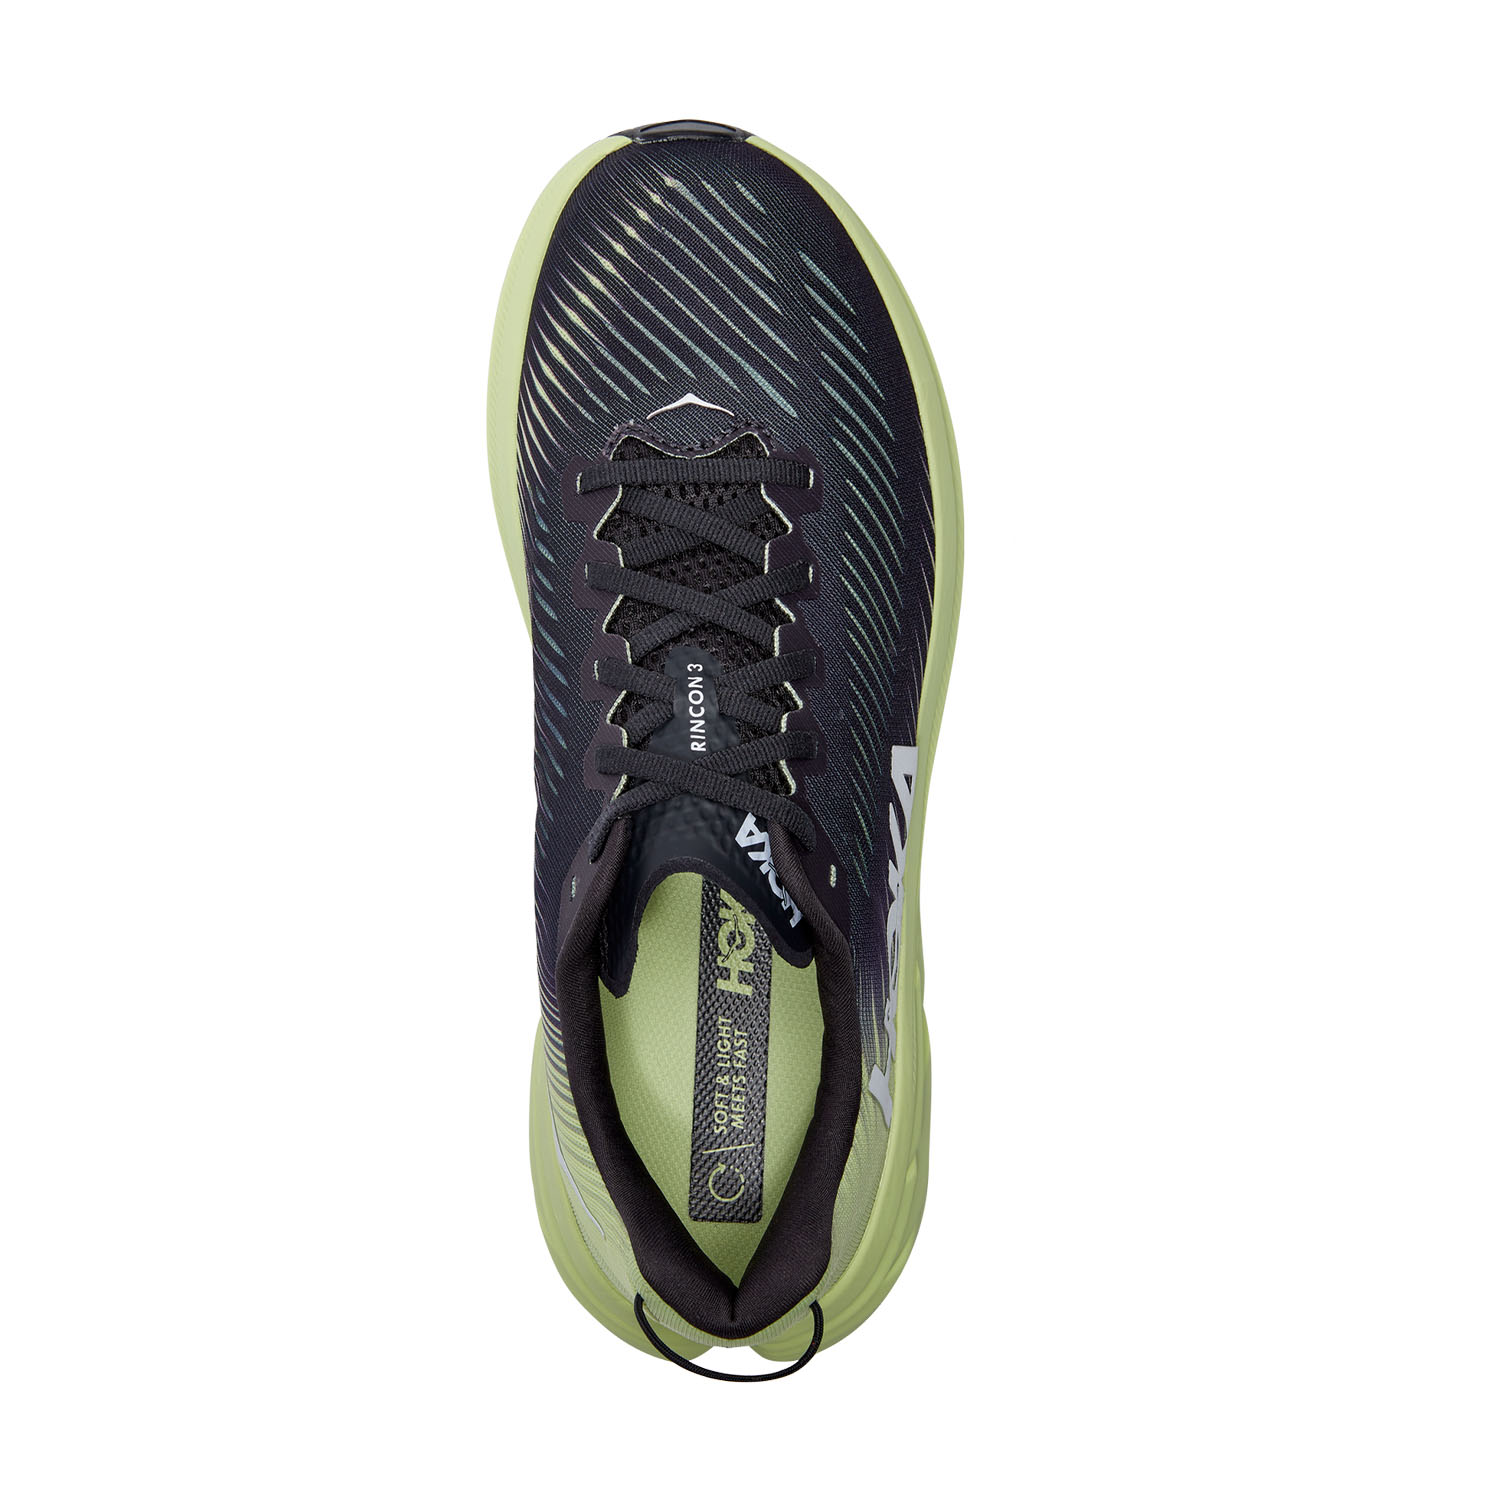 Hoka One One Rincon 3 - Blue/Graphite Butterfly